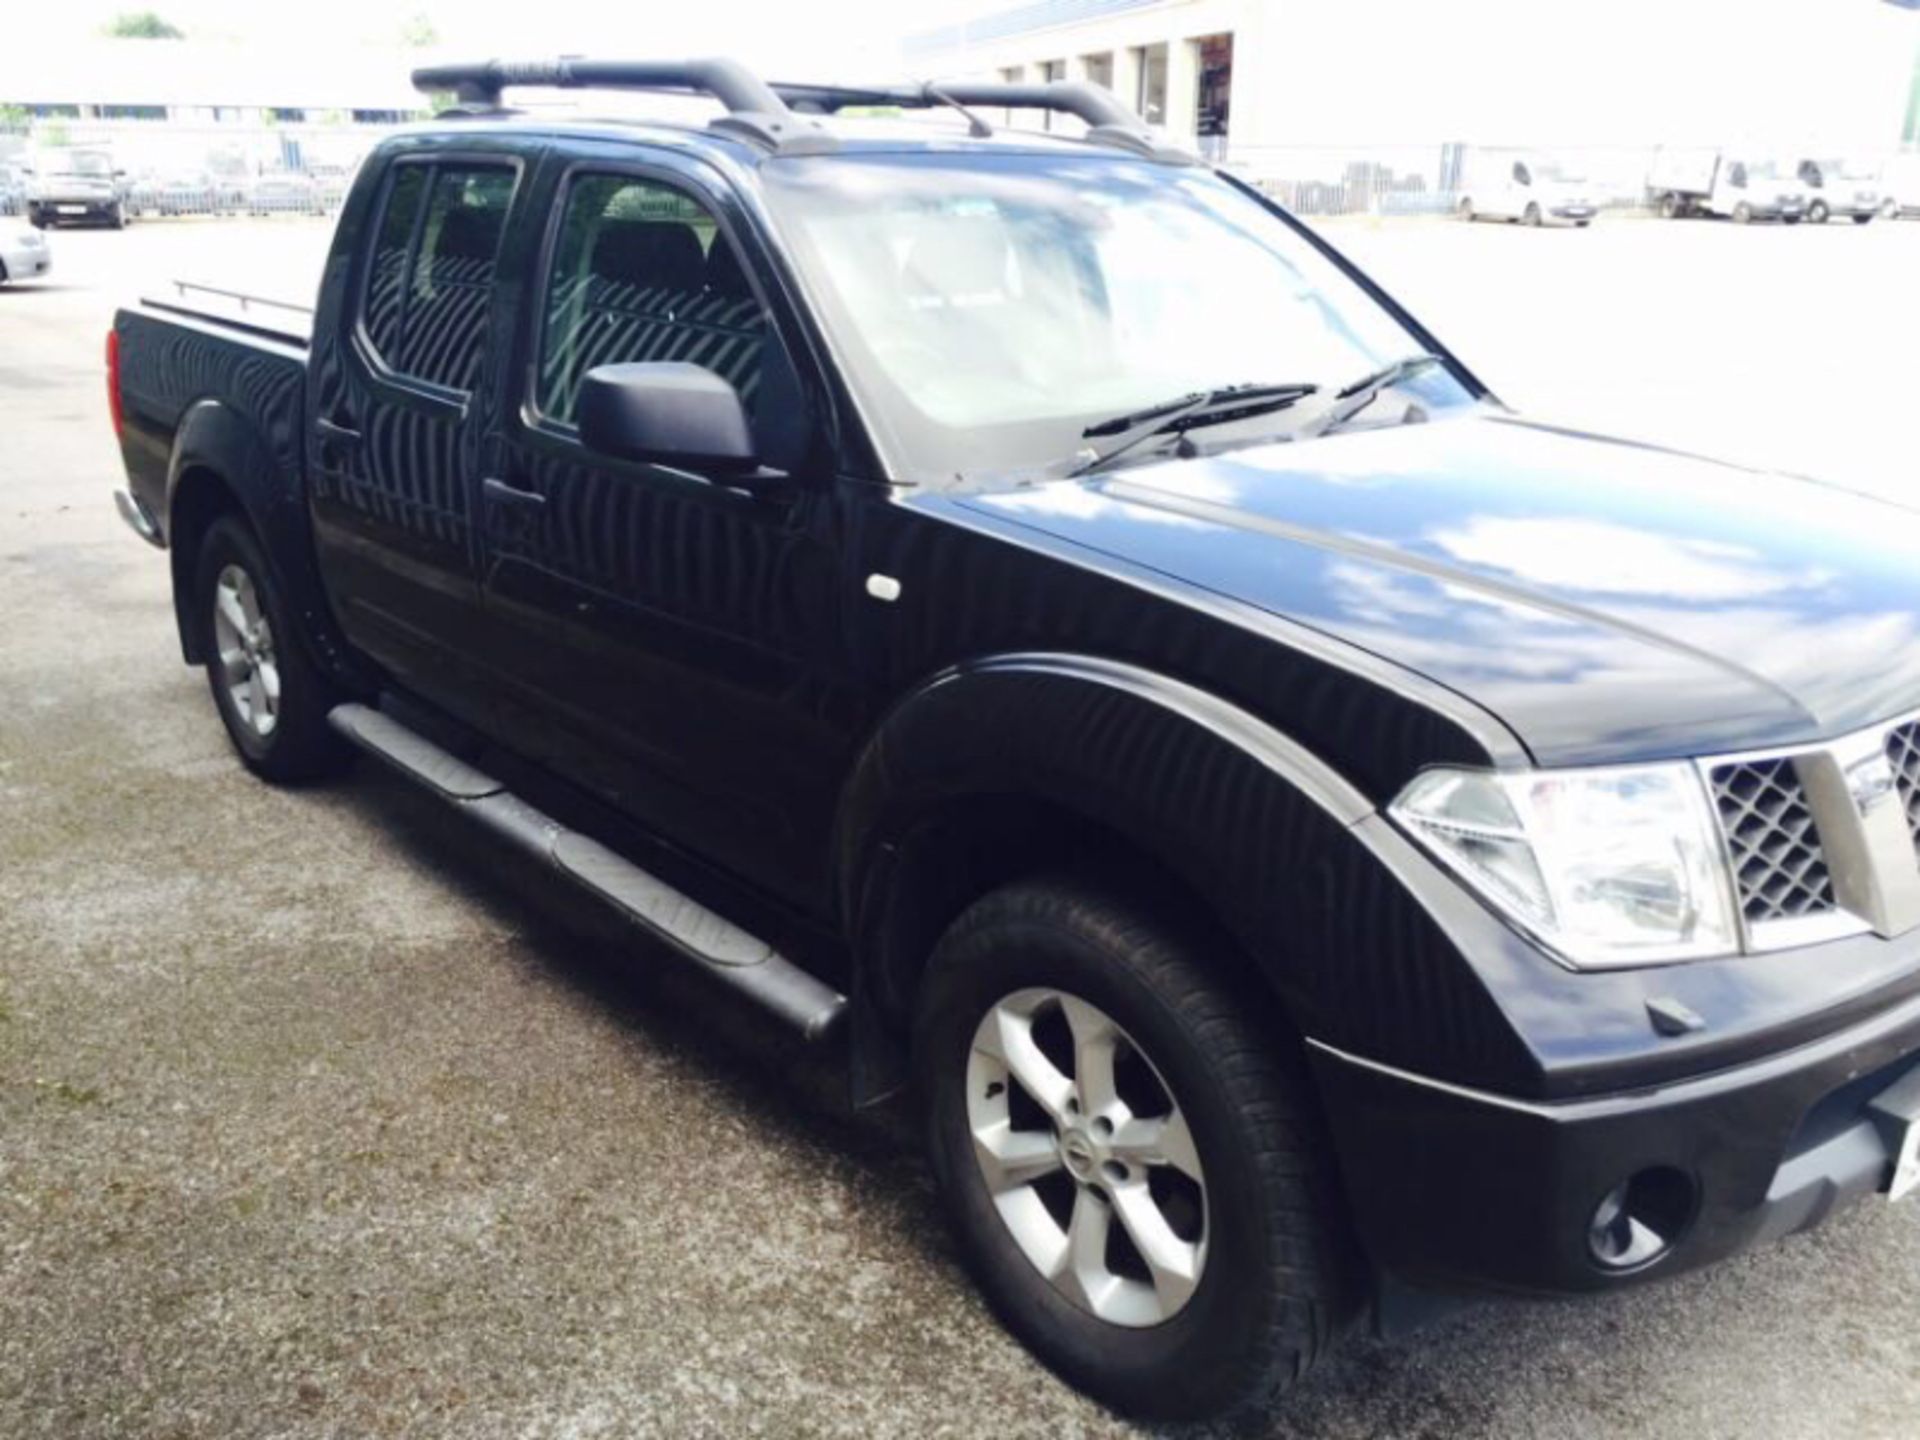 (On Sale) NISSAN NAVARA 2.5DCI - "OUTLAW" DOUBLE CAB - BLACK EDITION - 2006 - GREAT SPEC - NO VAT - Image 2 of 11